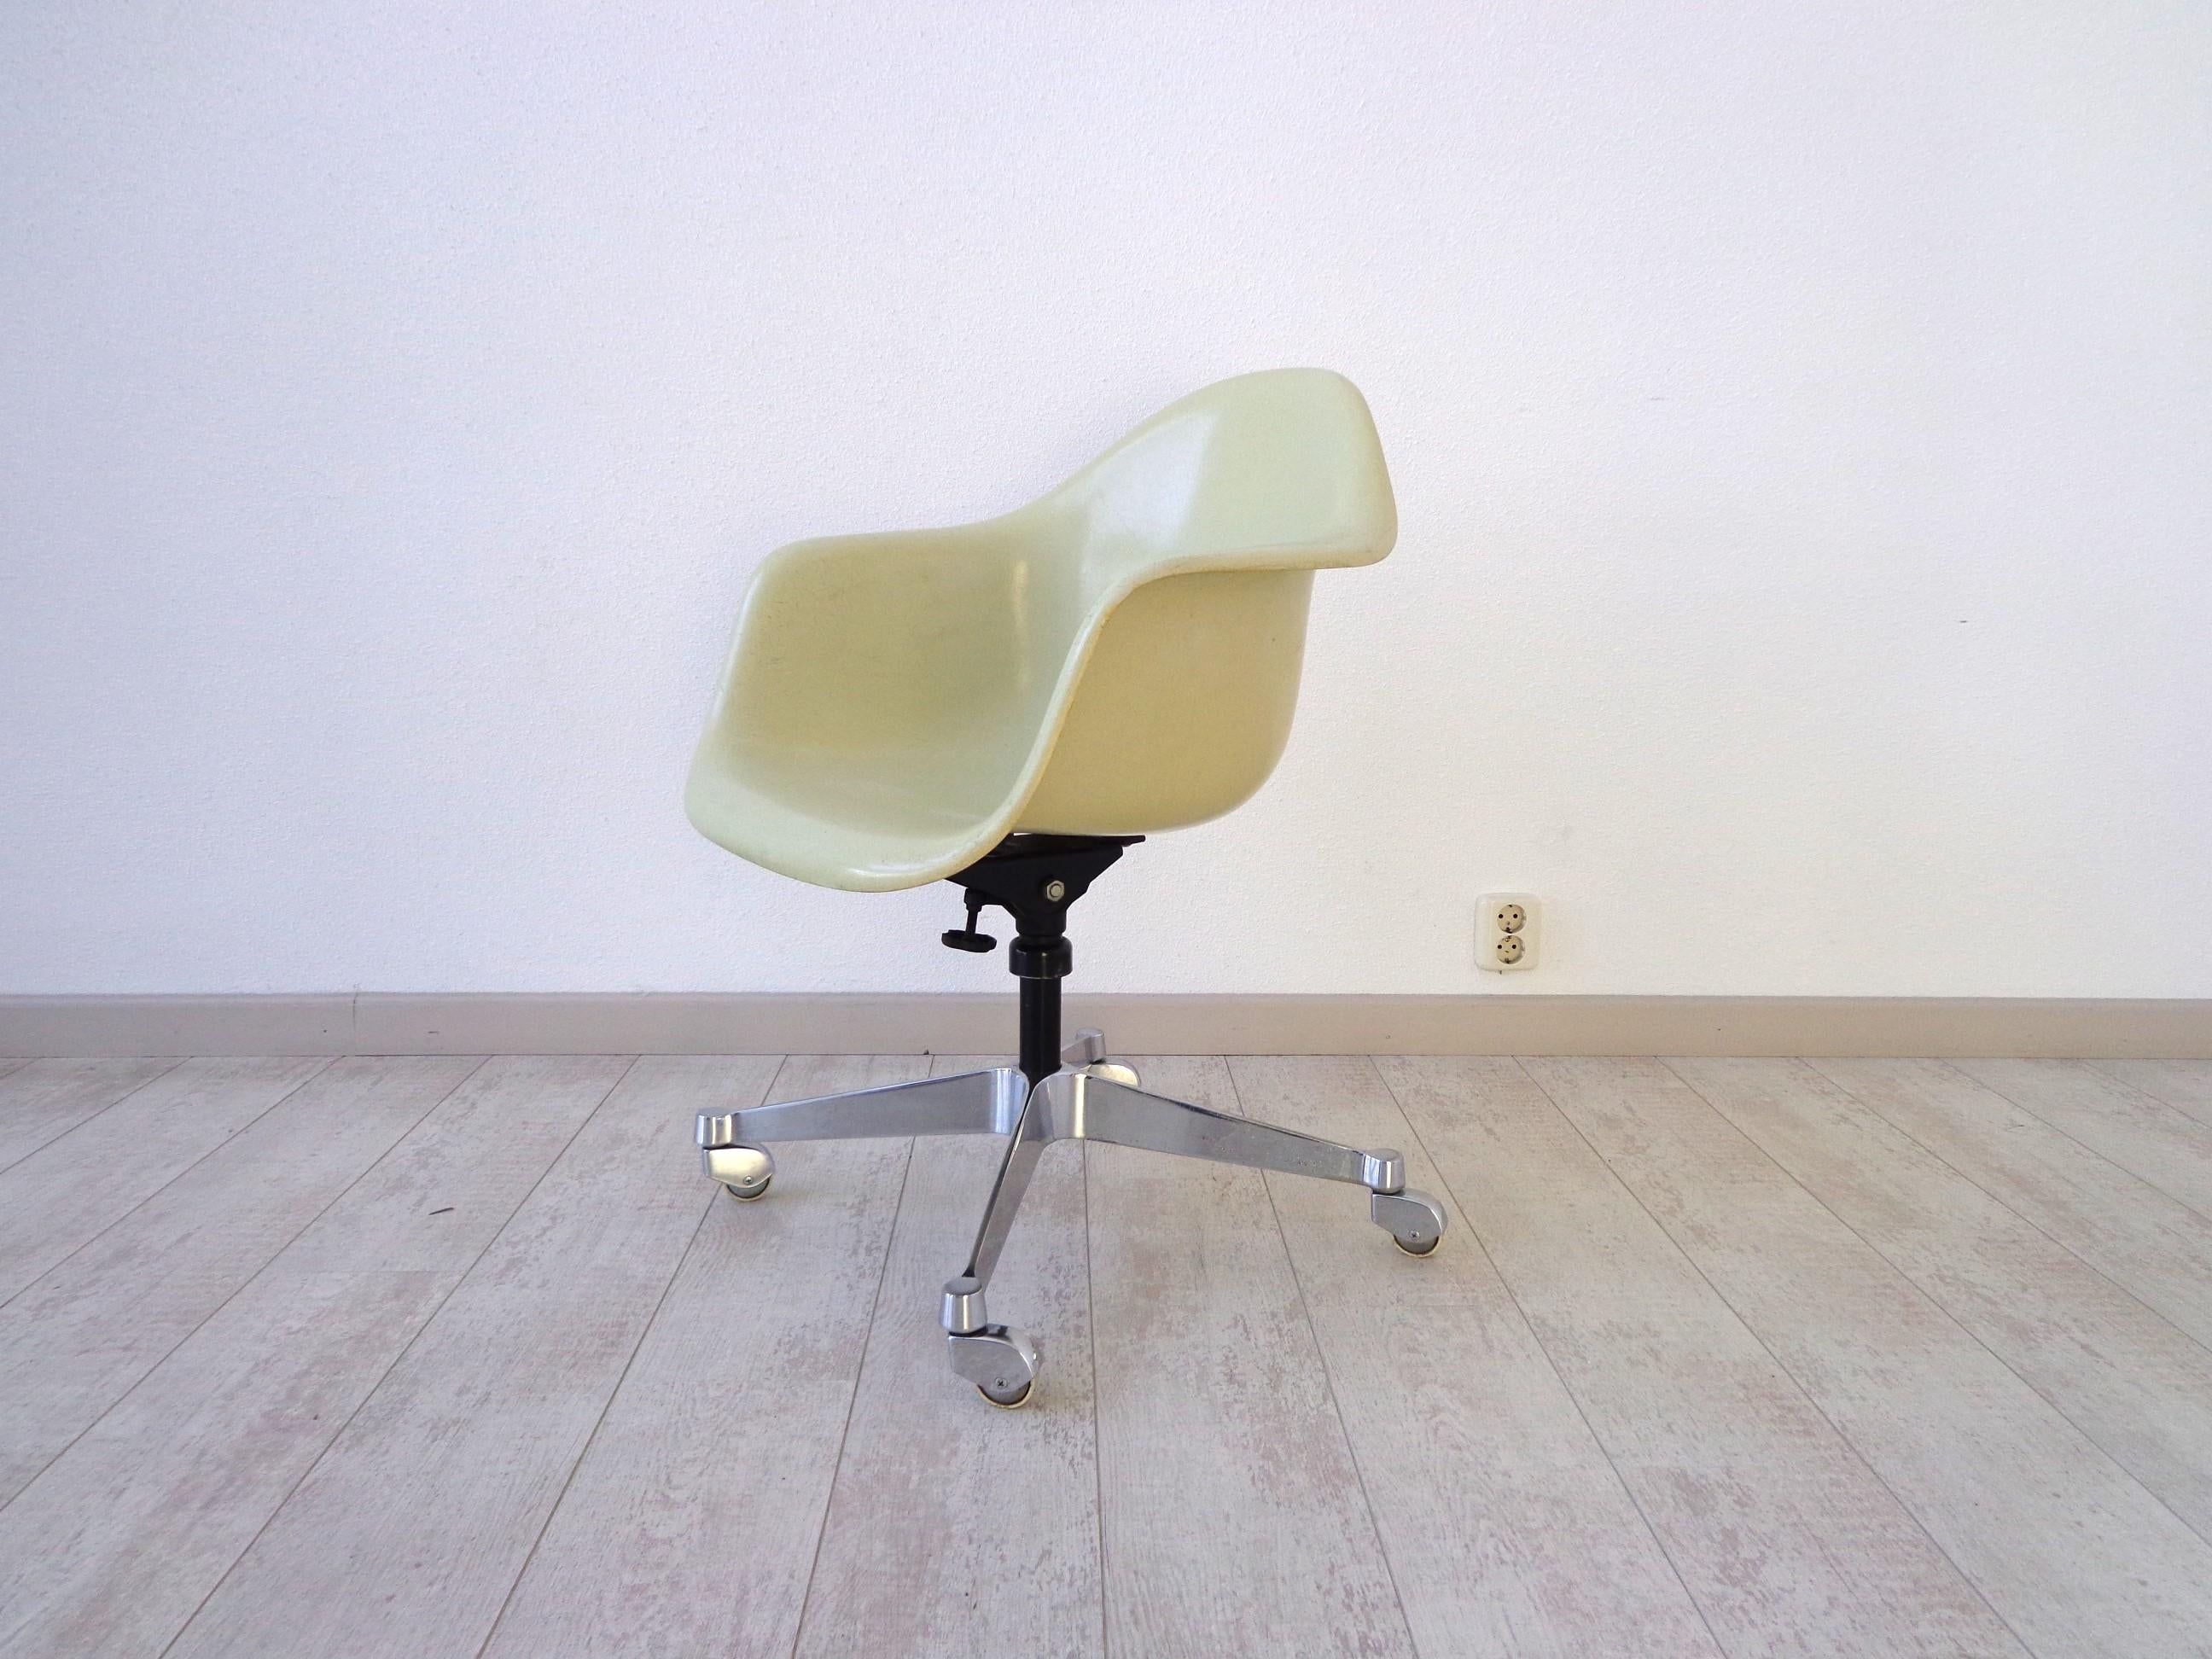 Classic Mid-Century Modern office or desk armchair, model DAT-1 on castors and tilt swivel in off-white with molded fiberglass shell on a chrome base.
Tilt swivel and adjustable base works great.
Adjustable seat height from: 18.11